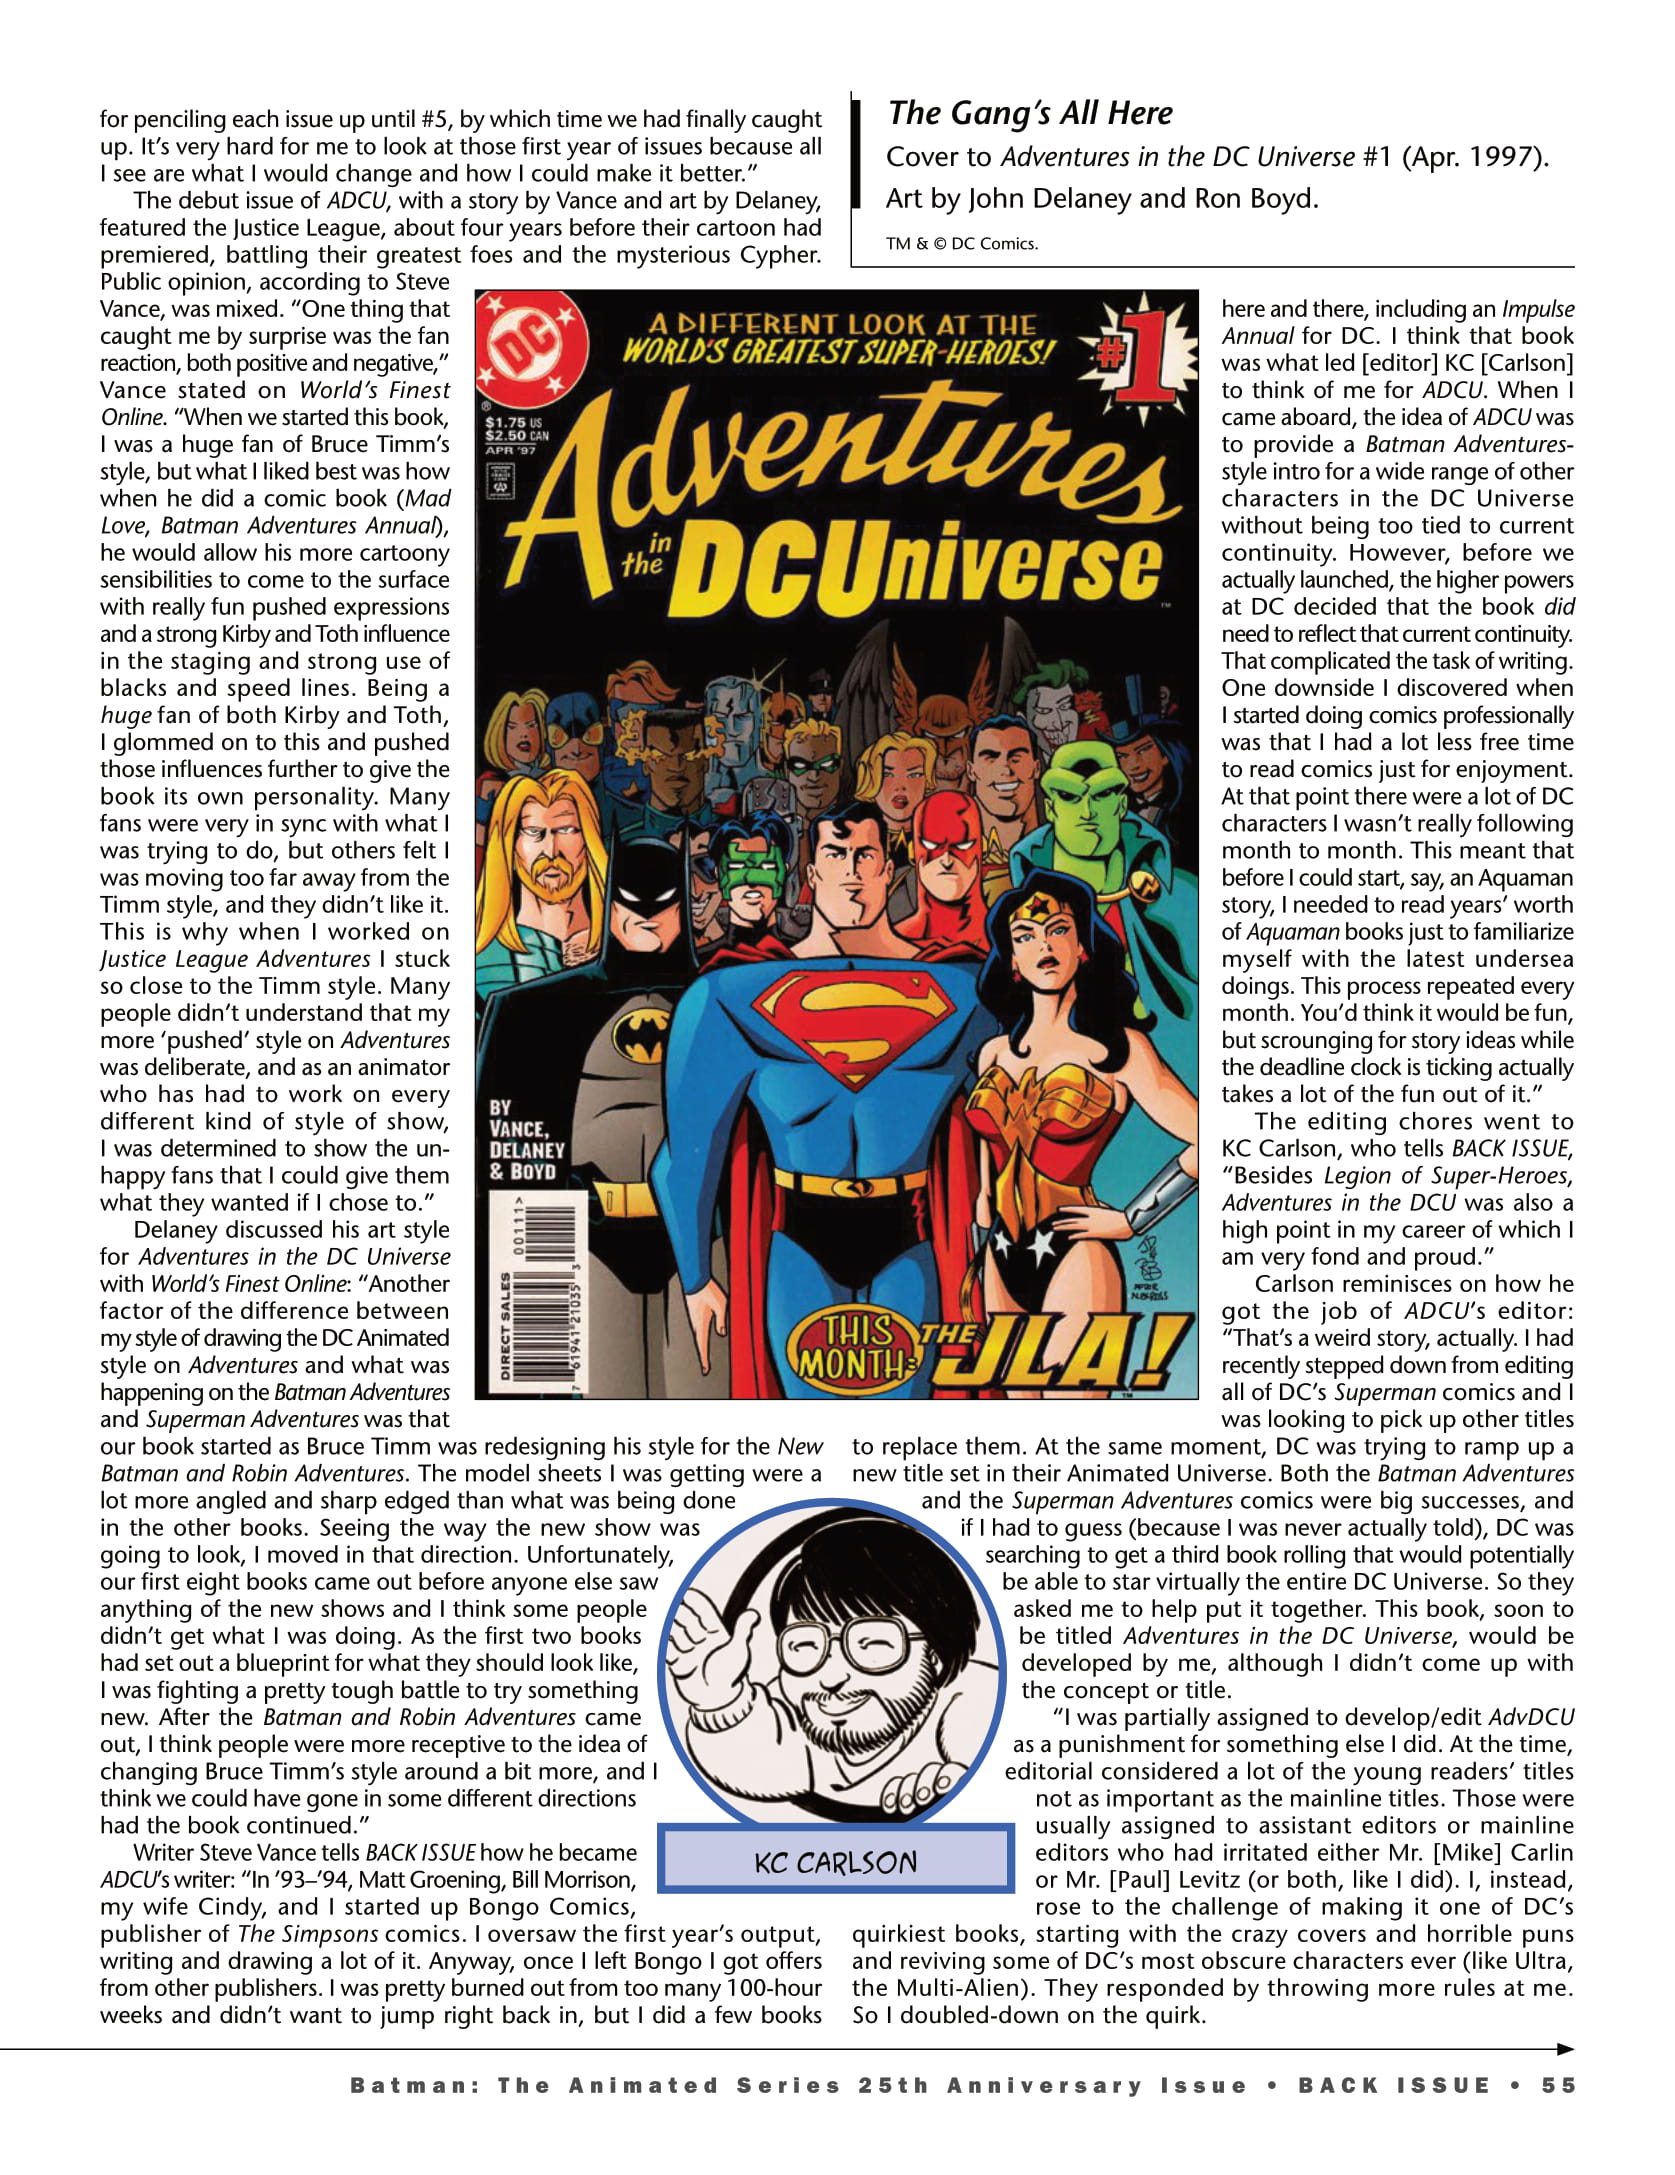 Read online Back Issue comic -  Issue #99 - 57